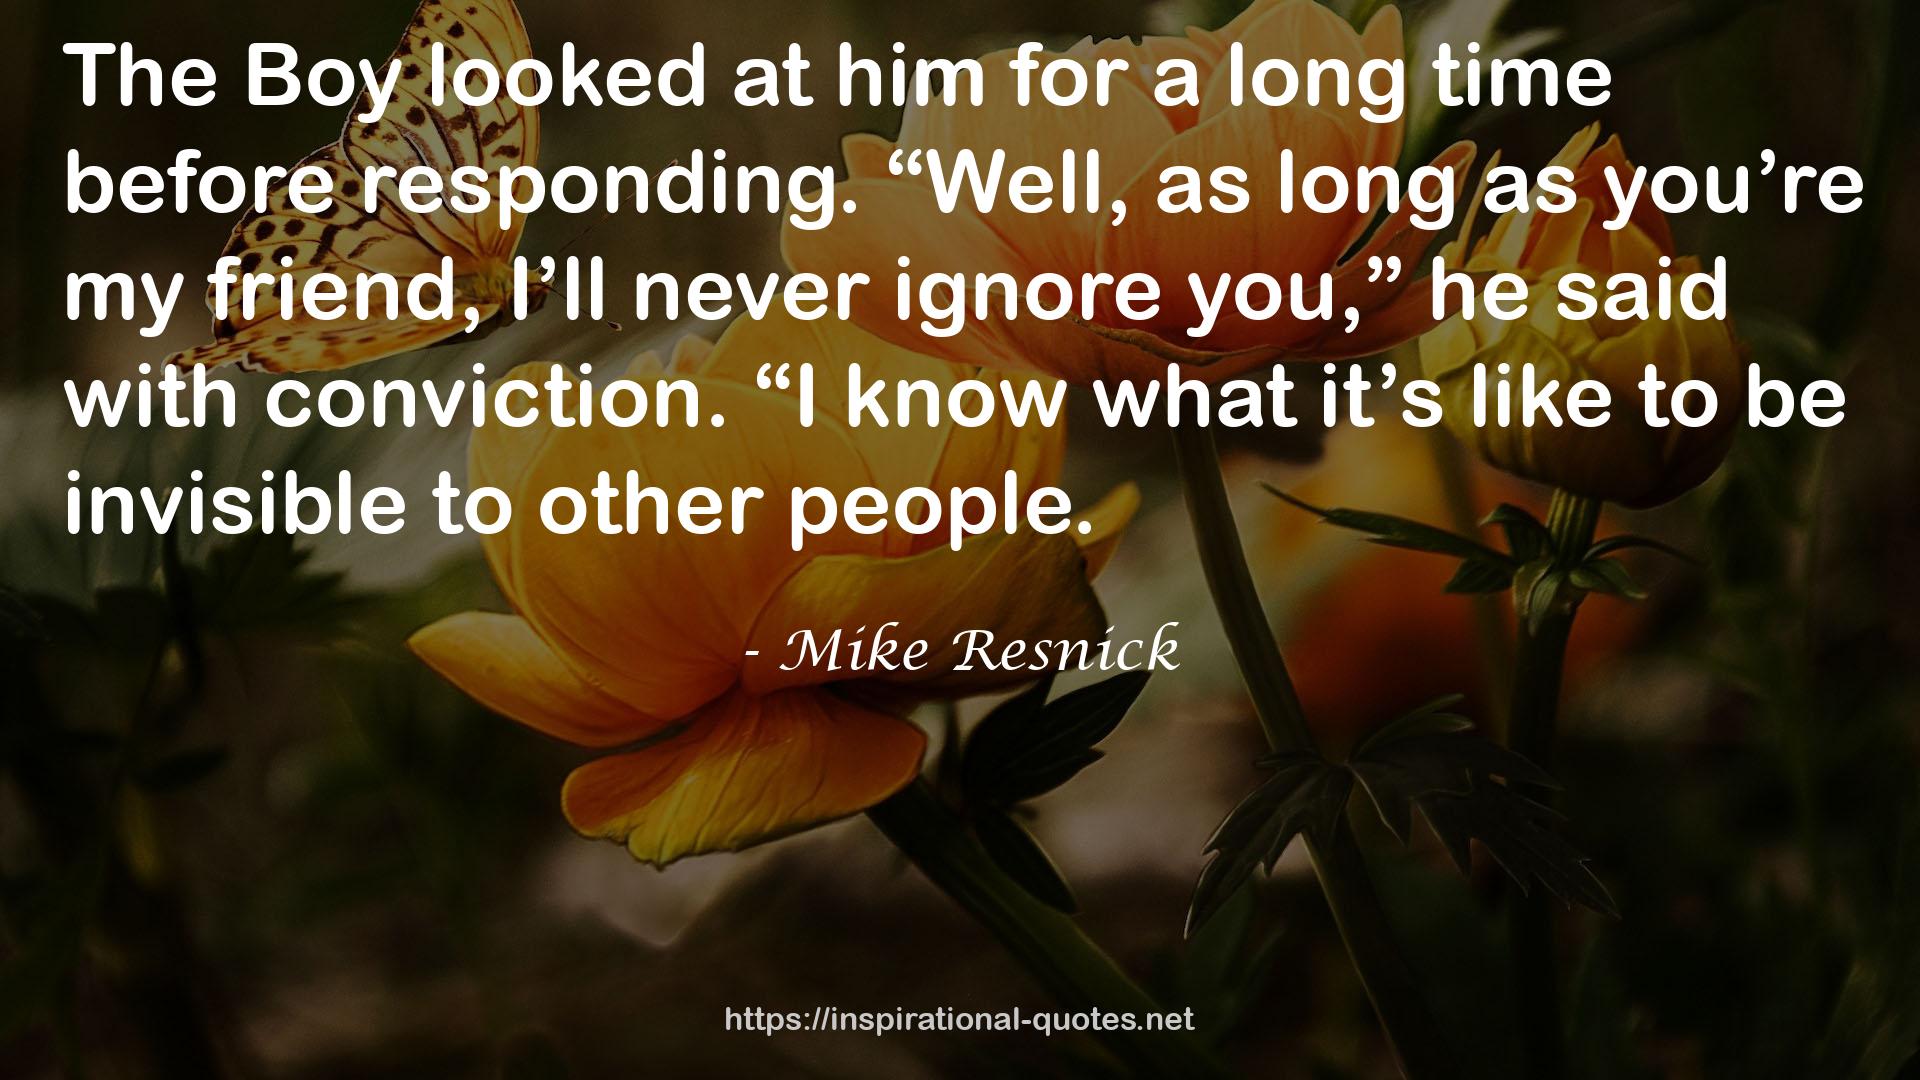 Mike Resnick QUOTES